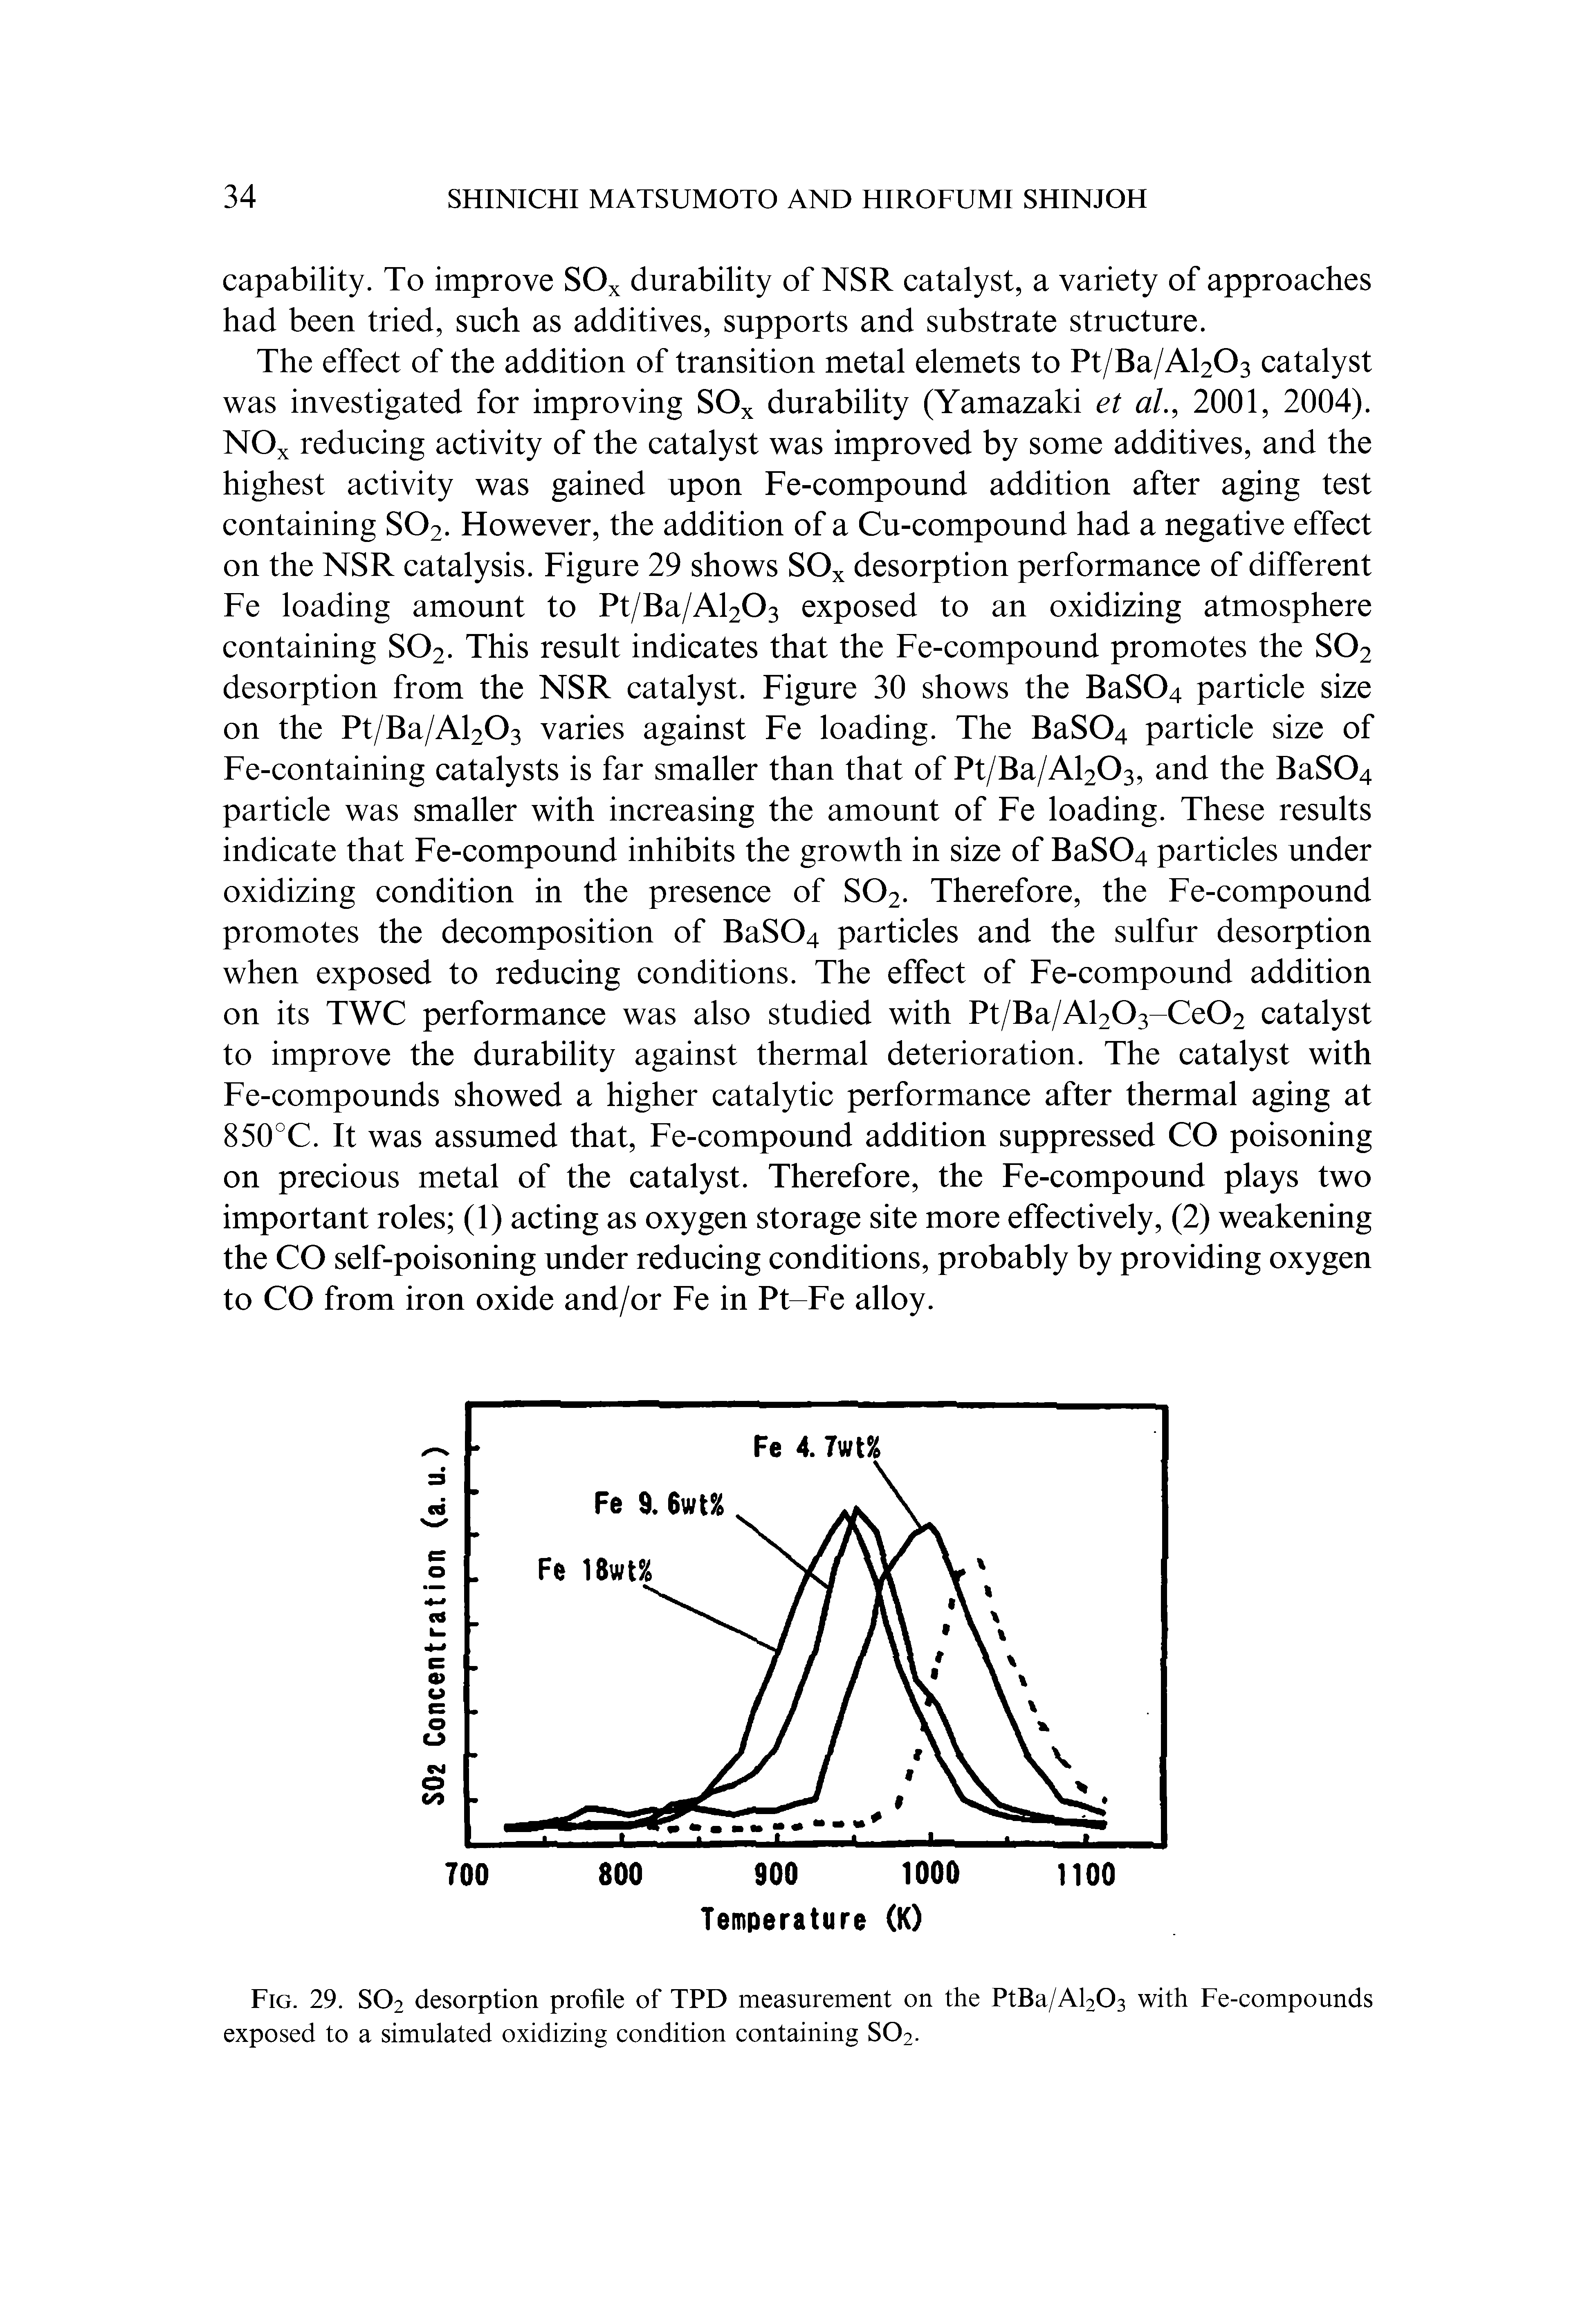 Fig. 29. S02 desorption profile of TPD measurement on the PtBa/Al203 with Fe-compounds exposed to a simulated oxidizing condition containing S02.